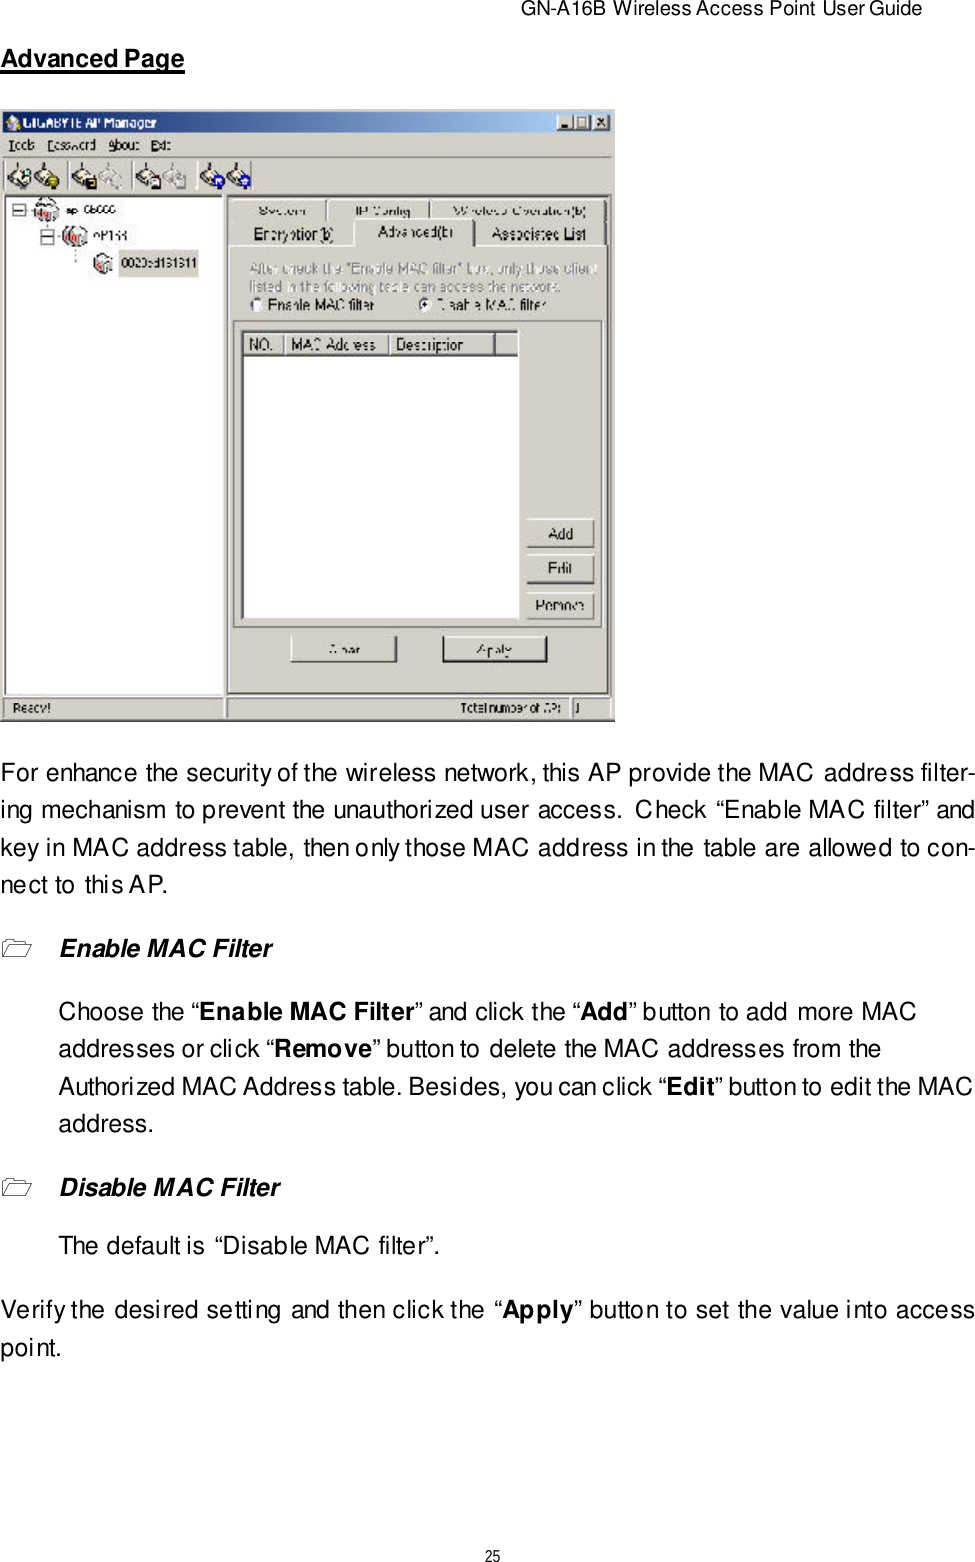                          GN-A16B Wireless Access Point User Guide25Advanced PageFor enhance the security of the wireless network, this AP provide the MAC address filter-ing mechanism to prevent the unauthorized user access.  Check “Enable MAC filter” andkey in MAC address table, then only those MAC address in the table are allowed to con-nect to this AP.1Enable MAC FilterChoose the “Enable MAC Filter” and click the “Add” button to add more MACaddresses or click “Remove” button to delete the MAC addresses from theAuthorized MAC Address table. Besides, you can click “Edit” button to edit the MACaddress.1Disable MAC FilterThe default is “Disable MAC filter”.Verify the desired setting and then click the “Apply” button to set the value into accesspoint.